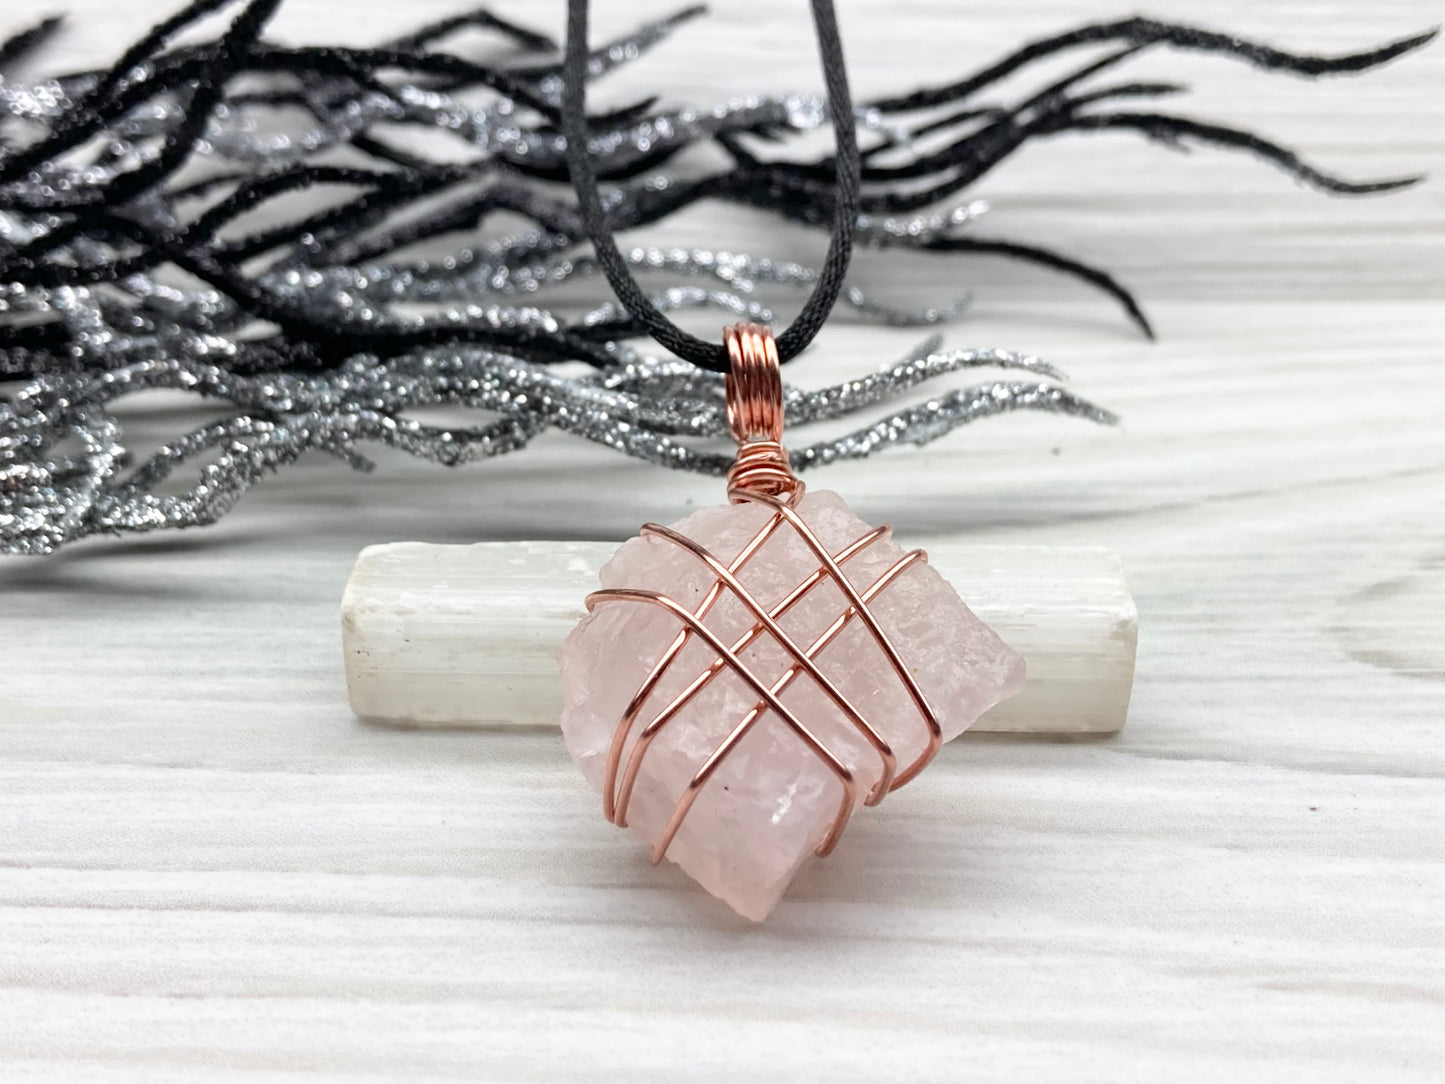 Raw Rose Quartz Necklace. Light Pink Crystal Hand Wrapped With Copper Wire. Comes On A Black Chain. Libra Zodiac Stone Jewelry. Spiritual New Age Style.